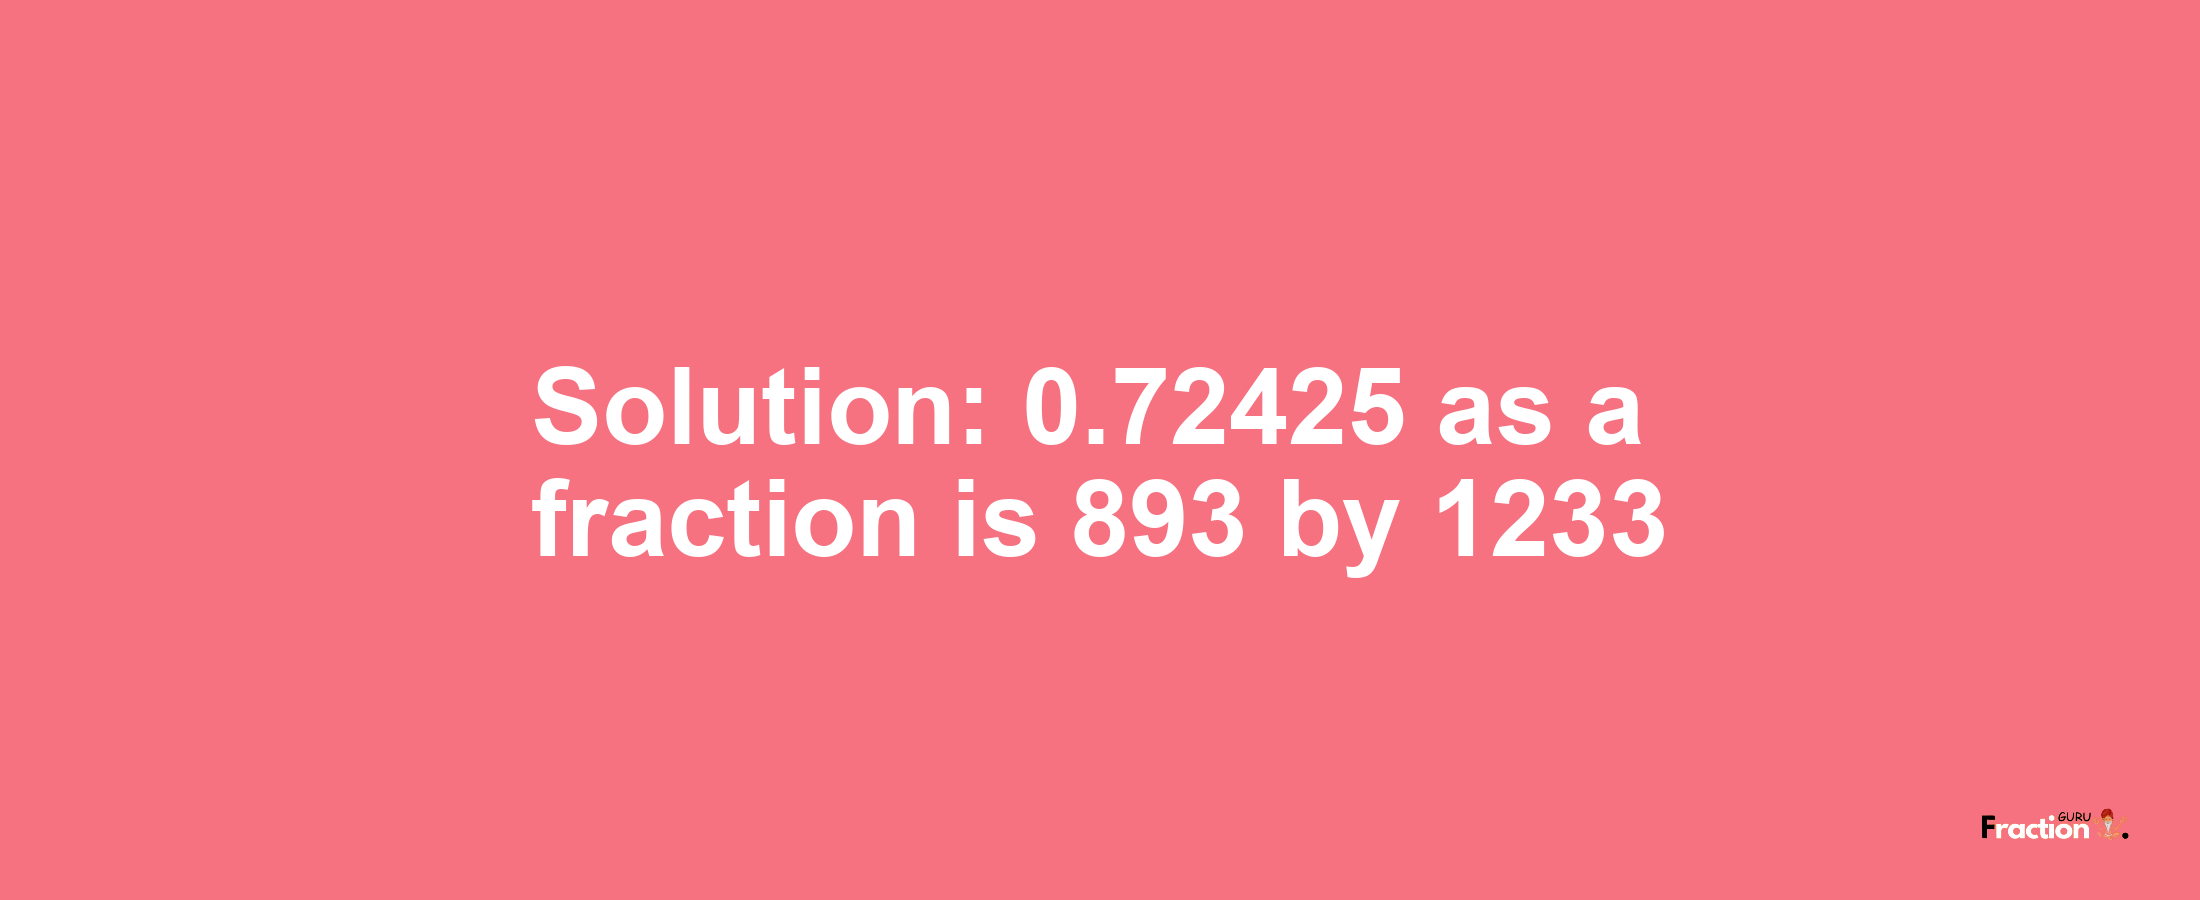 Solution:0.72425 as a fraction is 893/1233